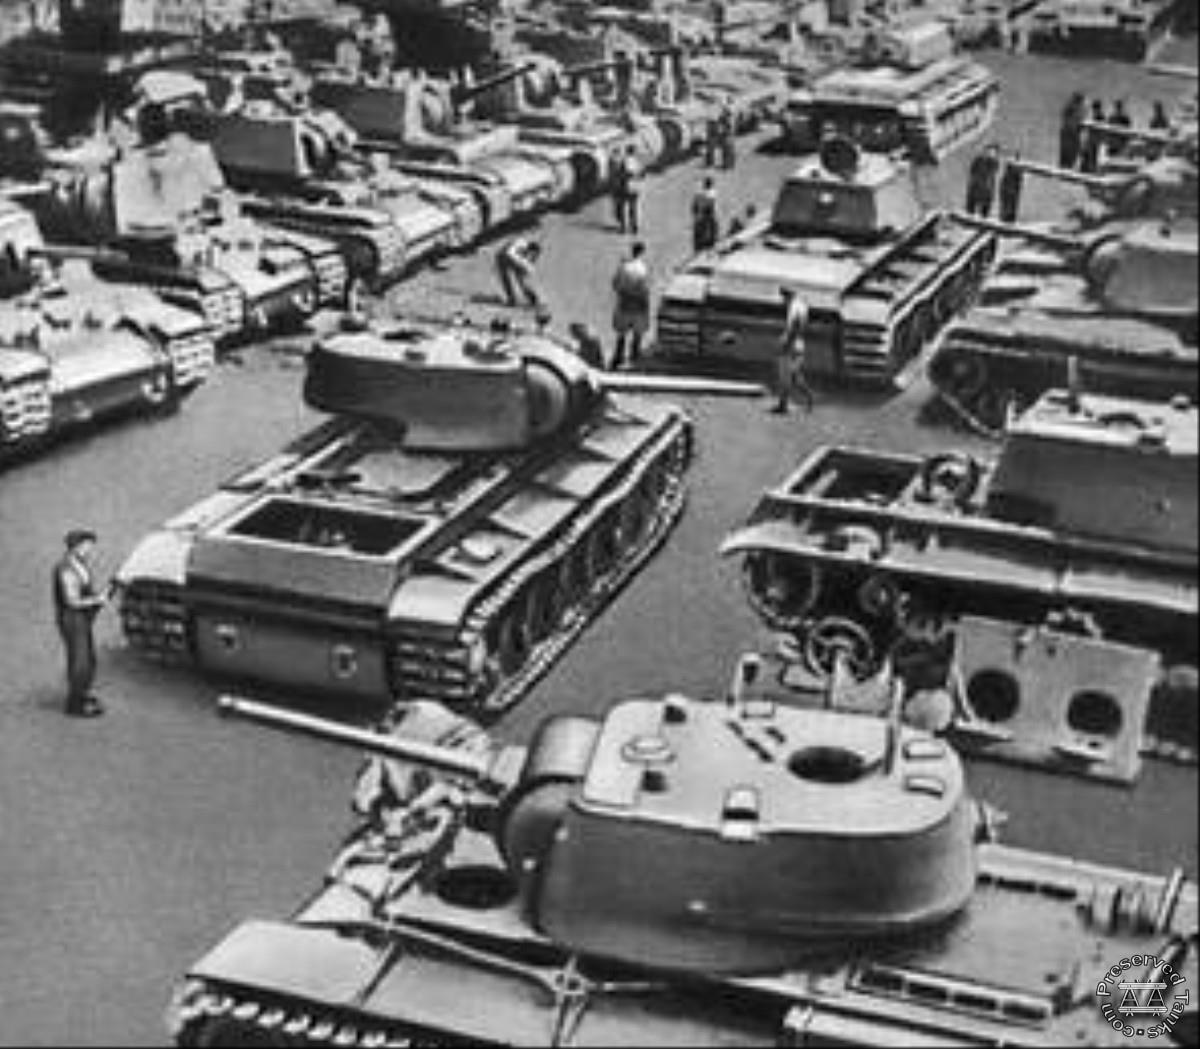 “Soviet tank production factory WWII”, KV-1 tanks are being assembled, site is presumed to be Chelyabinsk